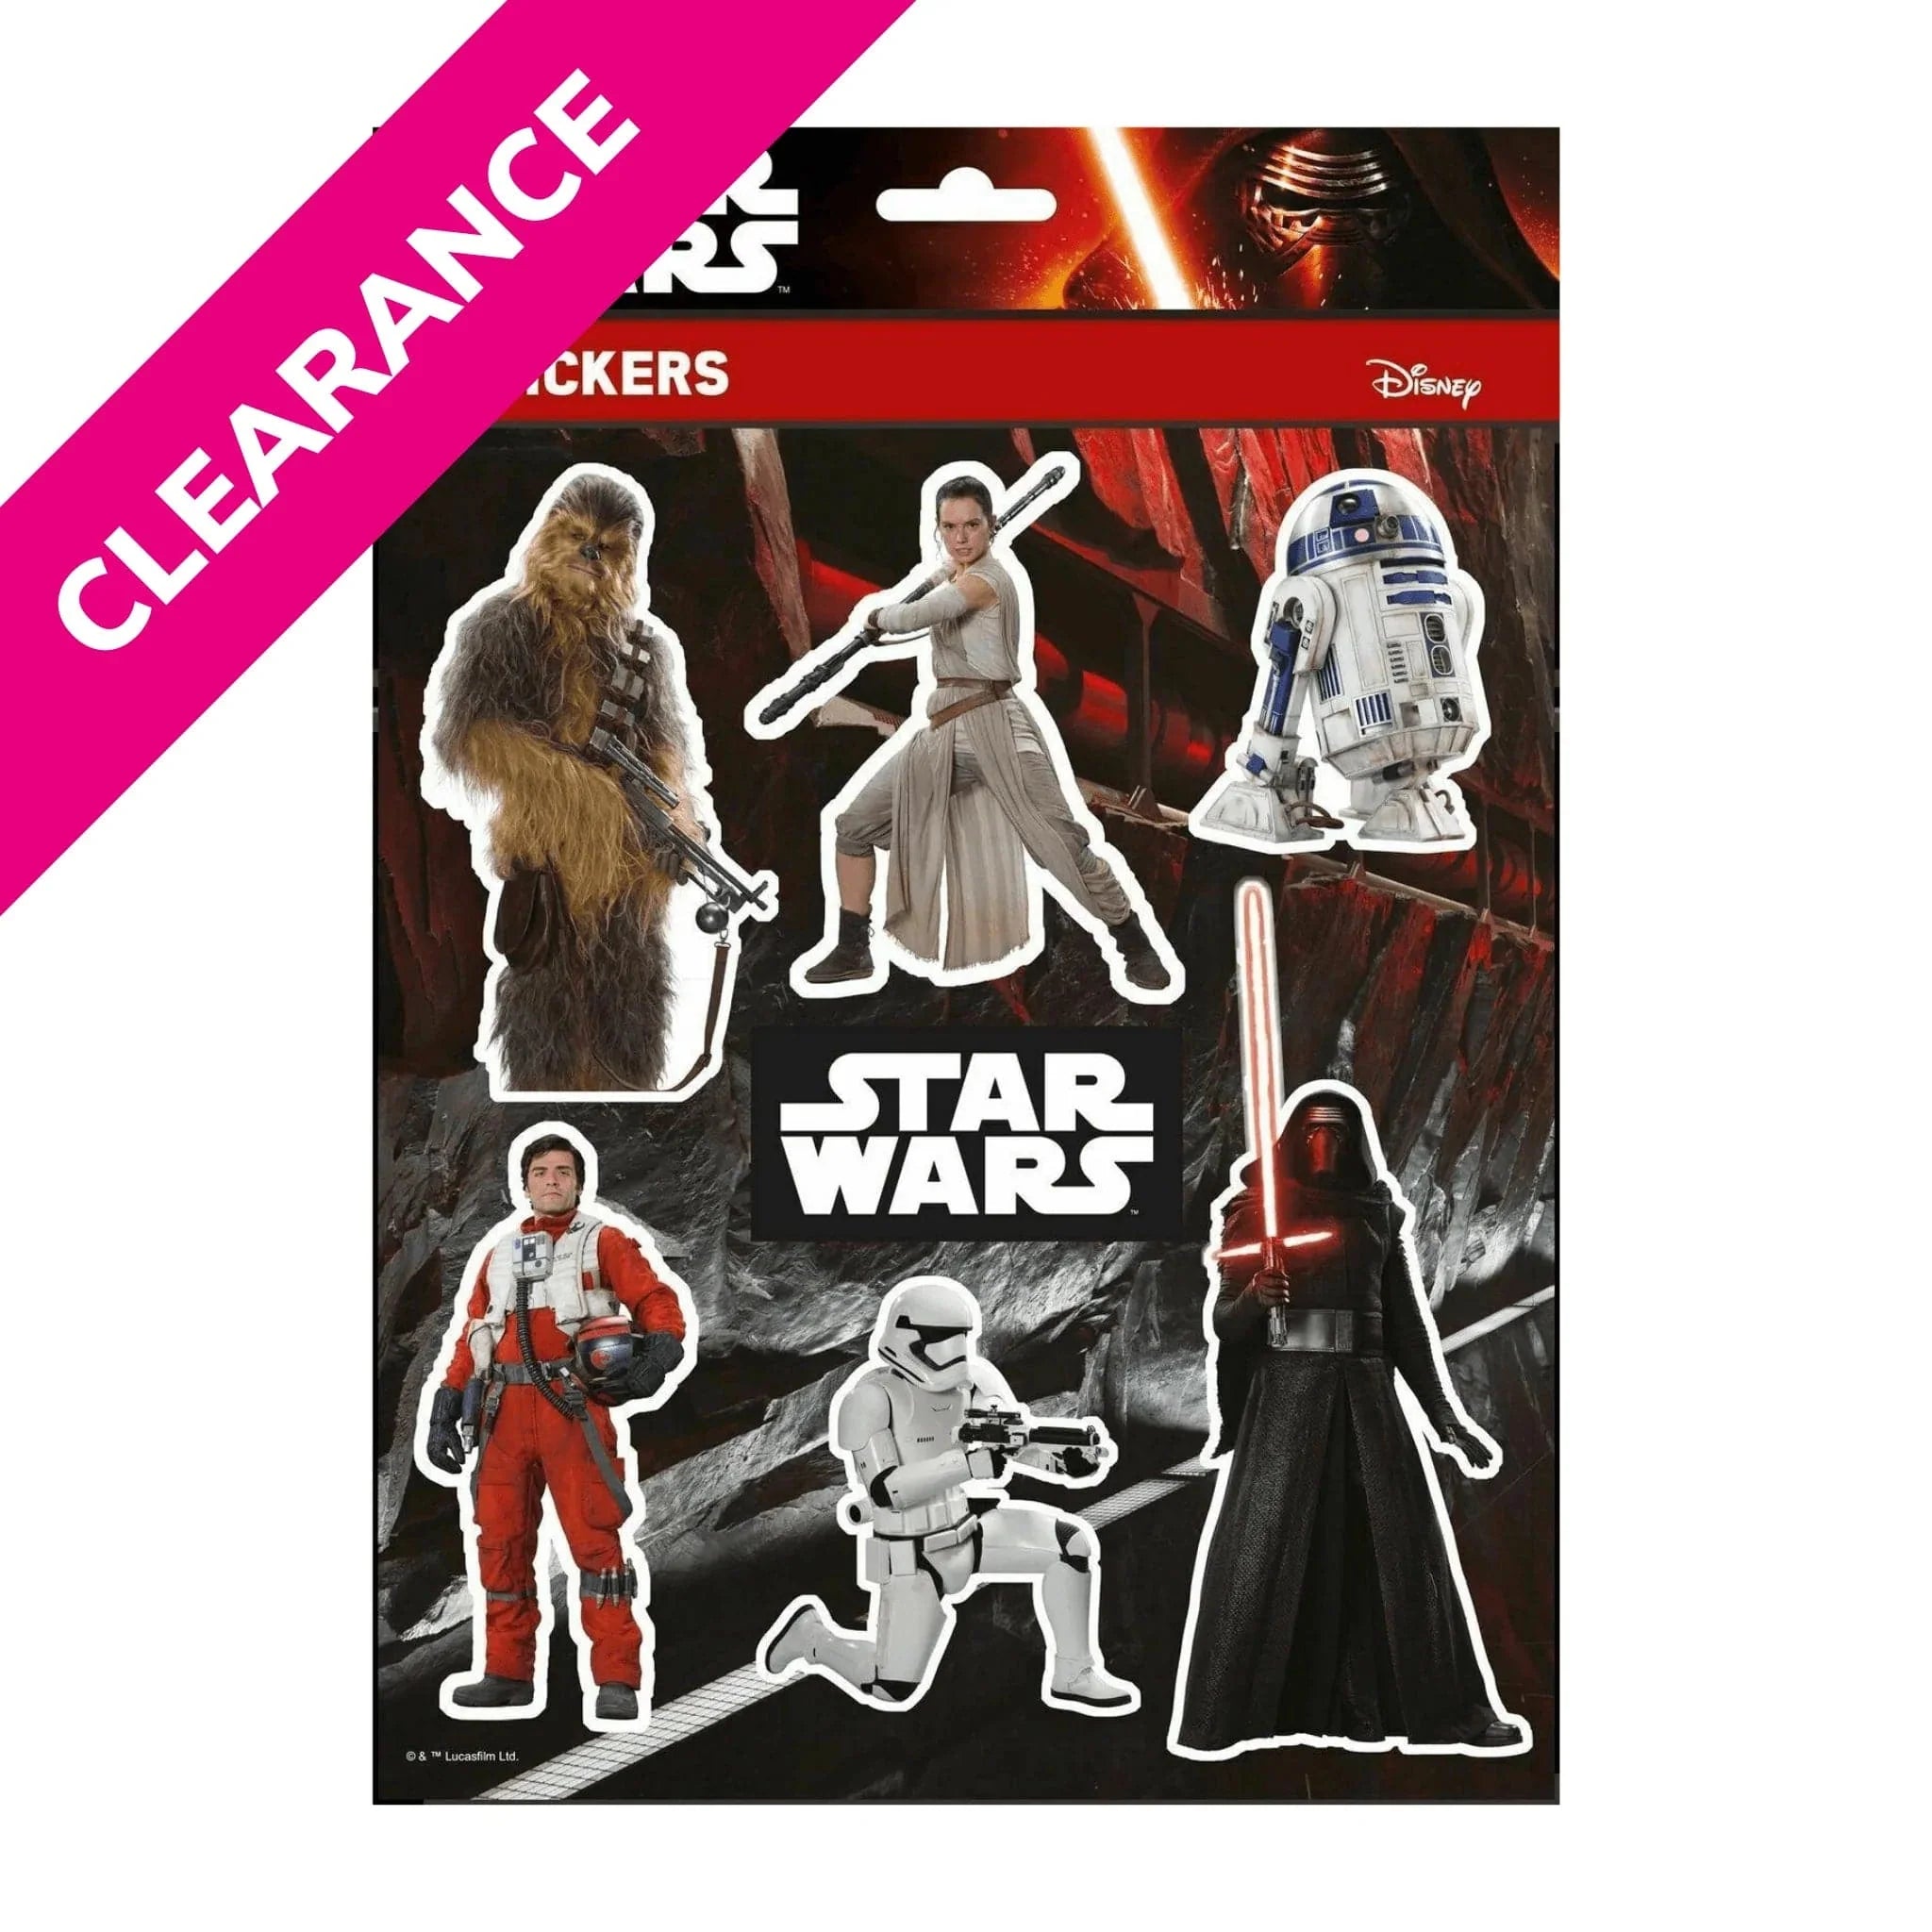 Star Wars Stickers Disney Characters High Quality A4 Pack Vinyl Decal Sheets - Kids Party Craft